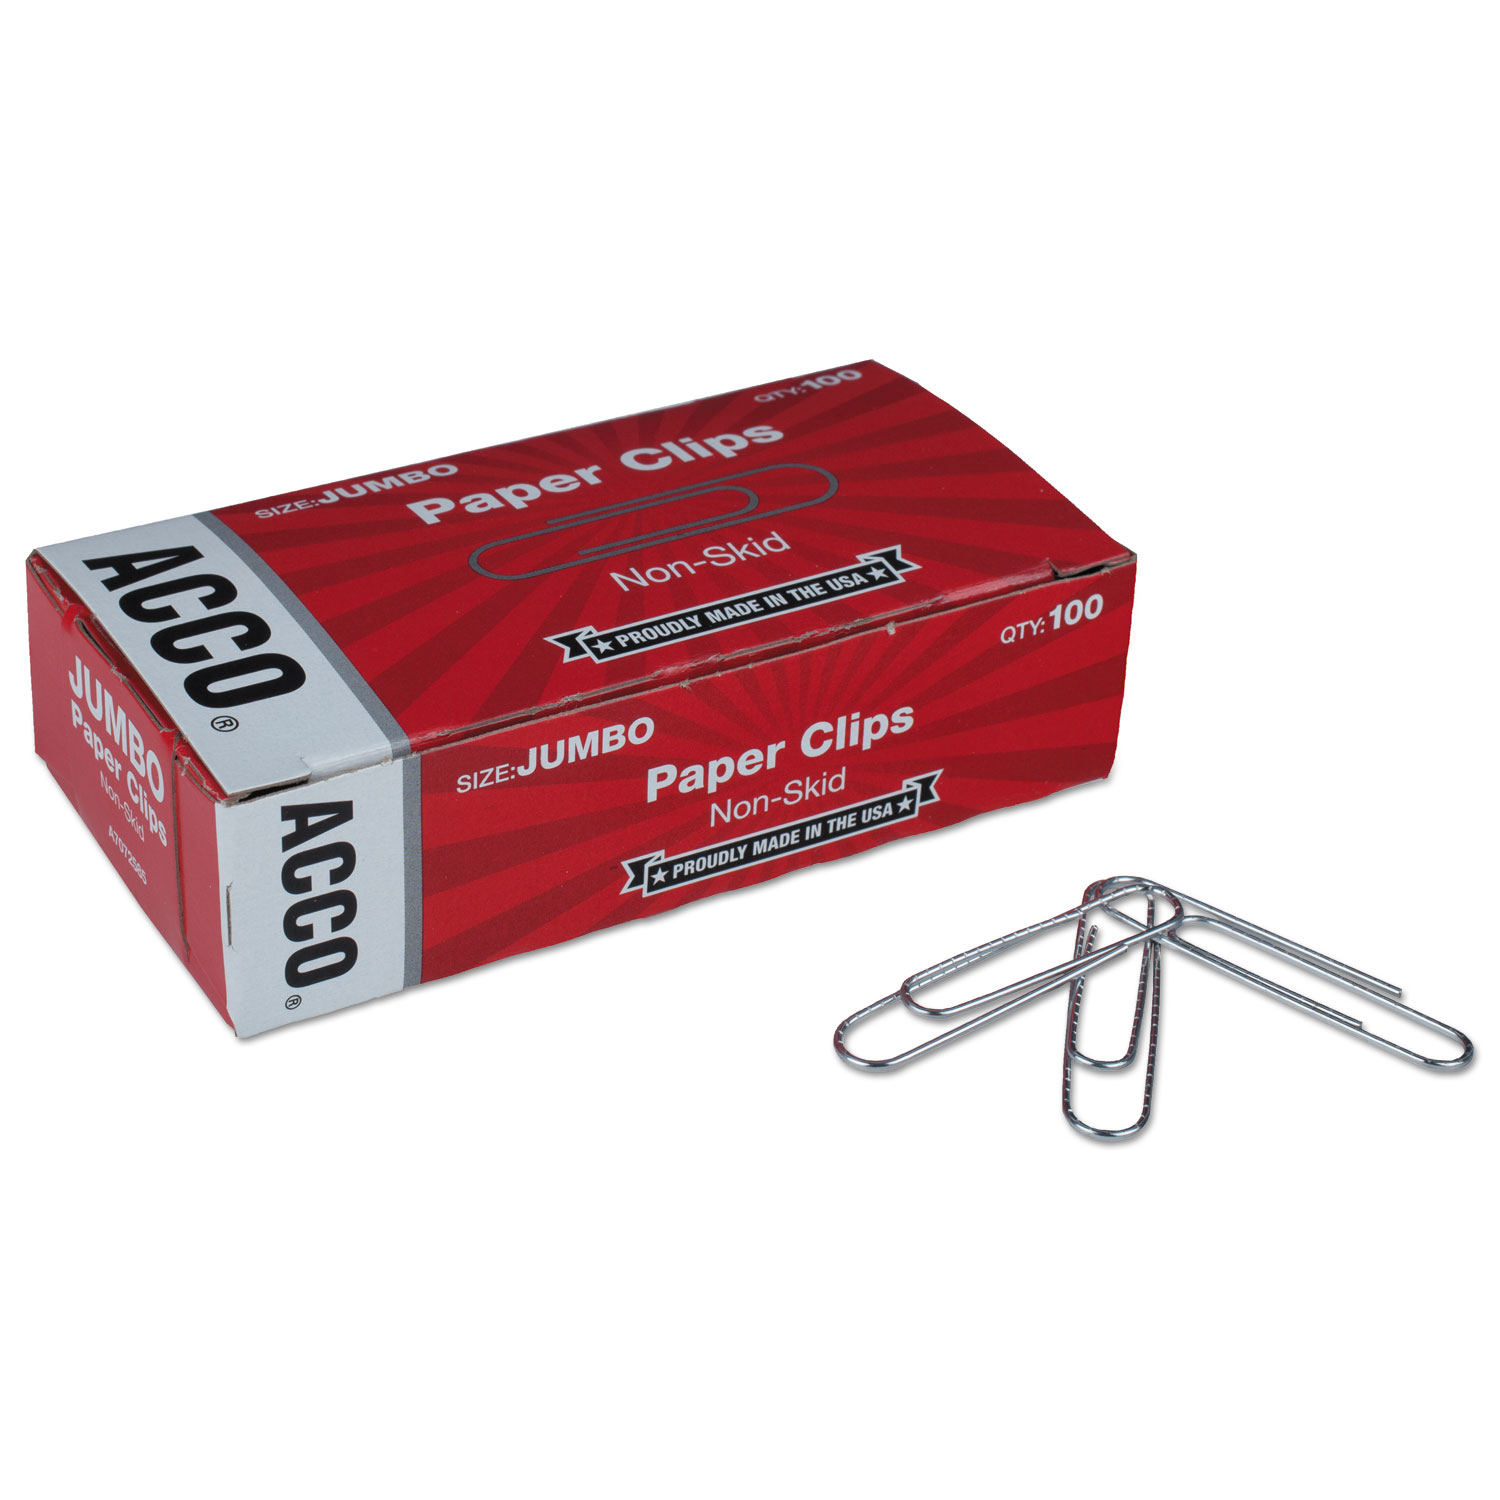 ACCO Standard Two-Piece Two-Prong Paper Fastener Bases, 2 Capacity, 2.75  Center to Center, Silver, 100/Box